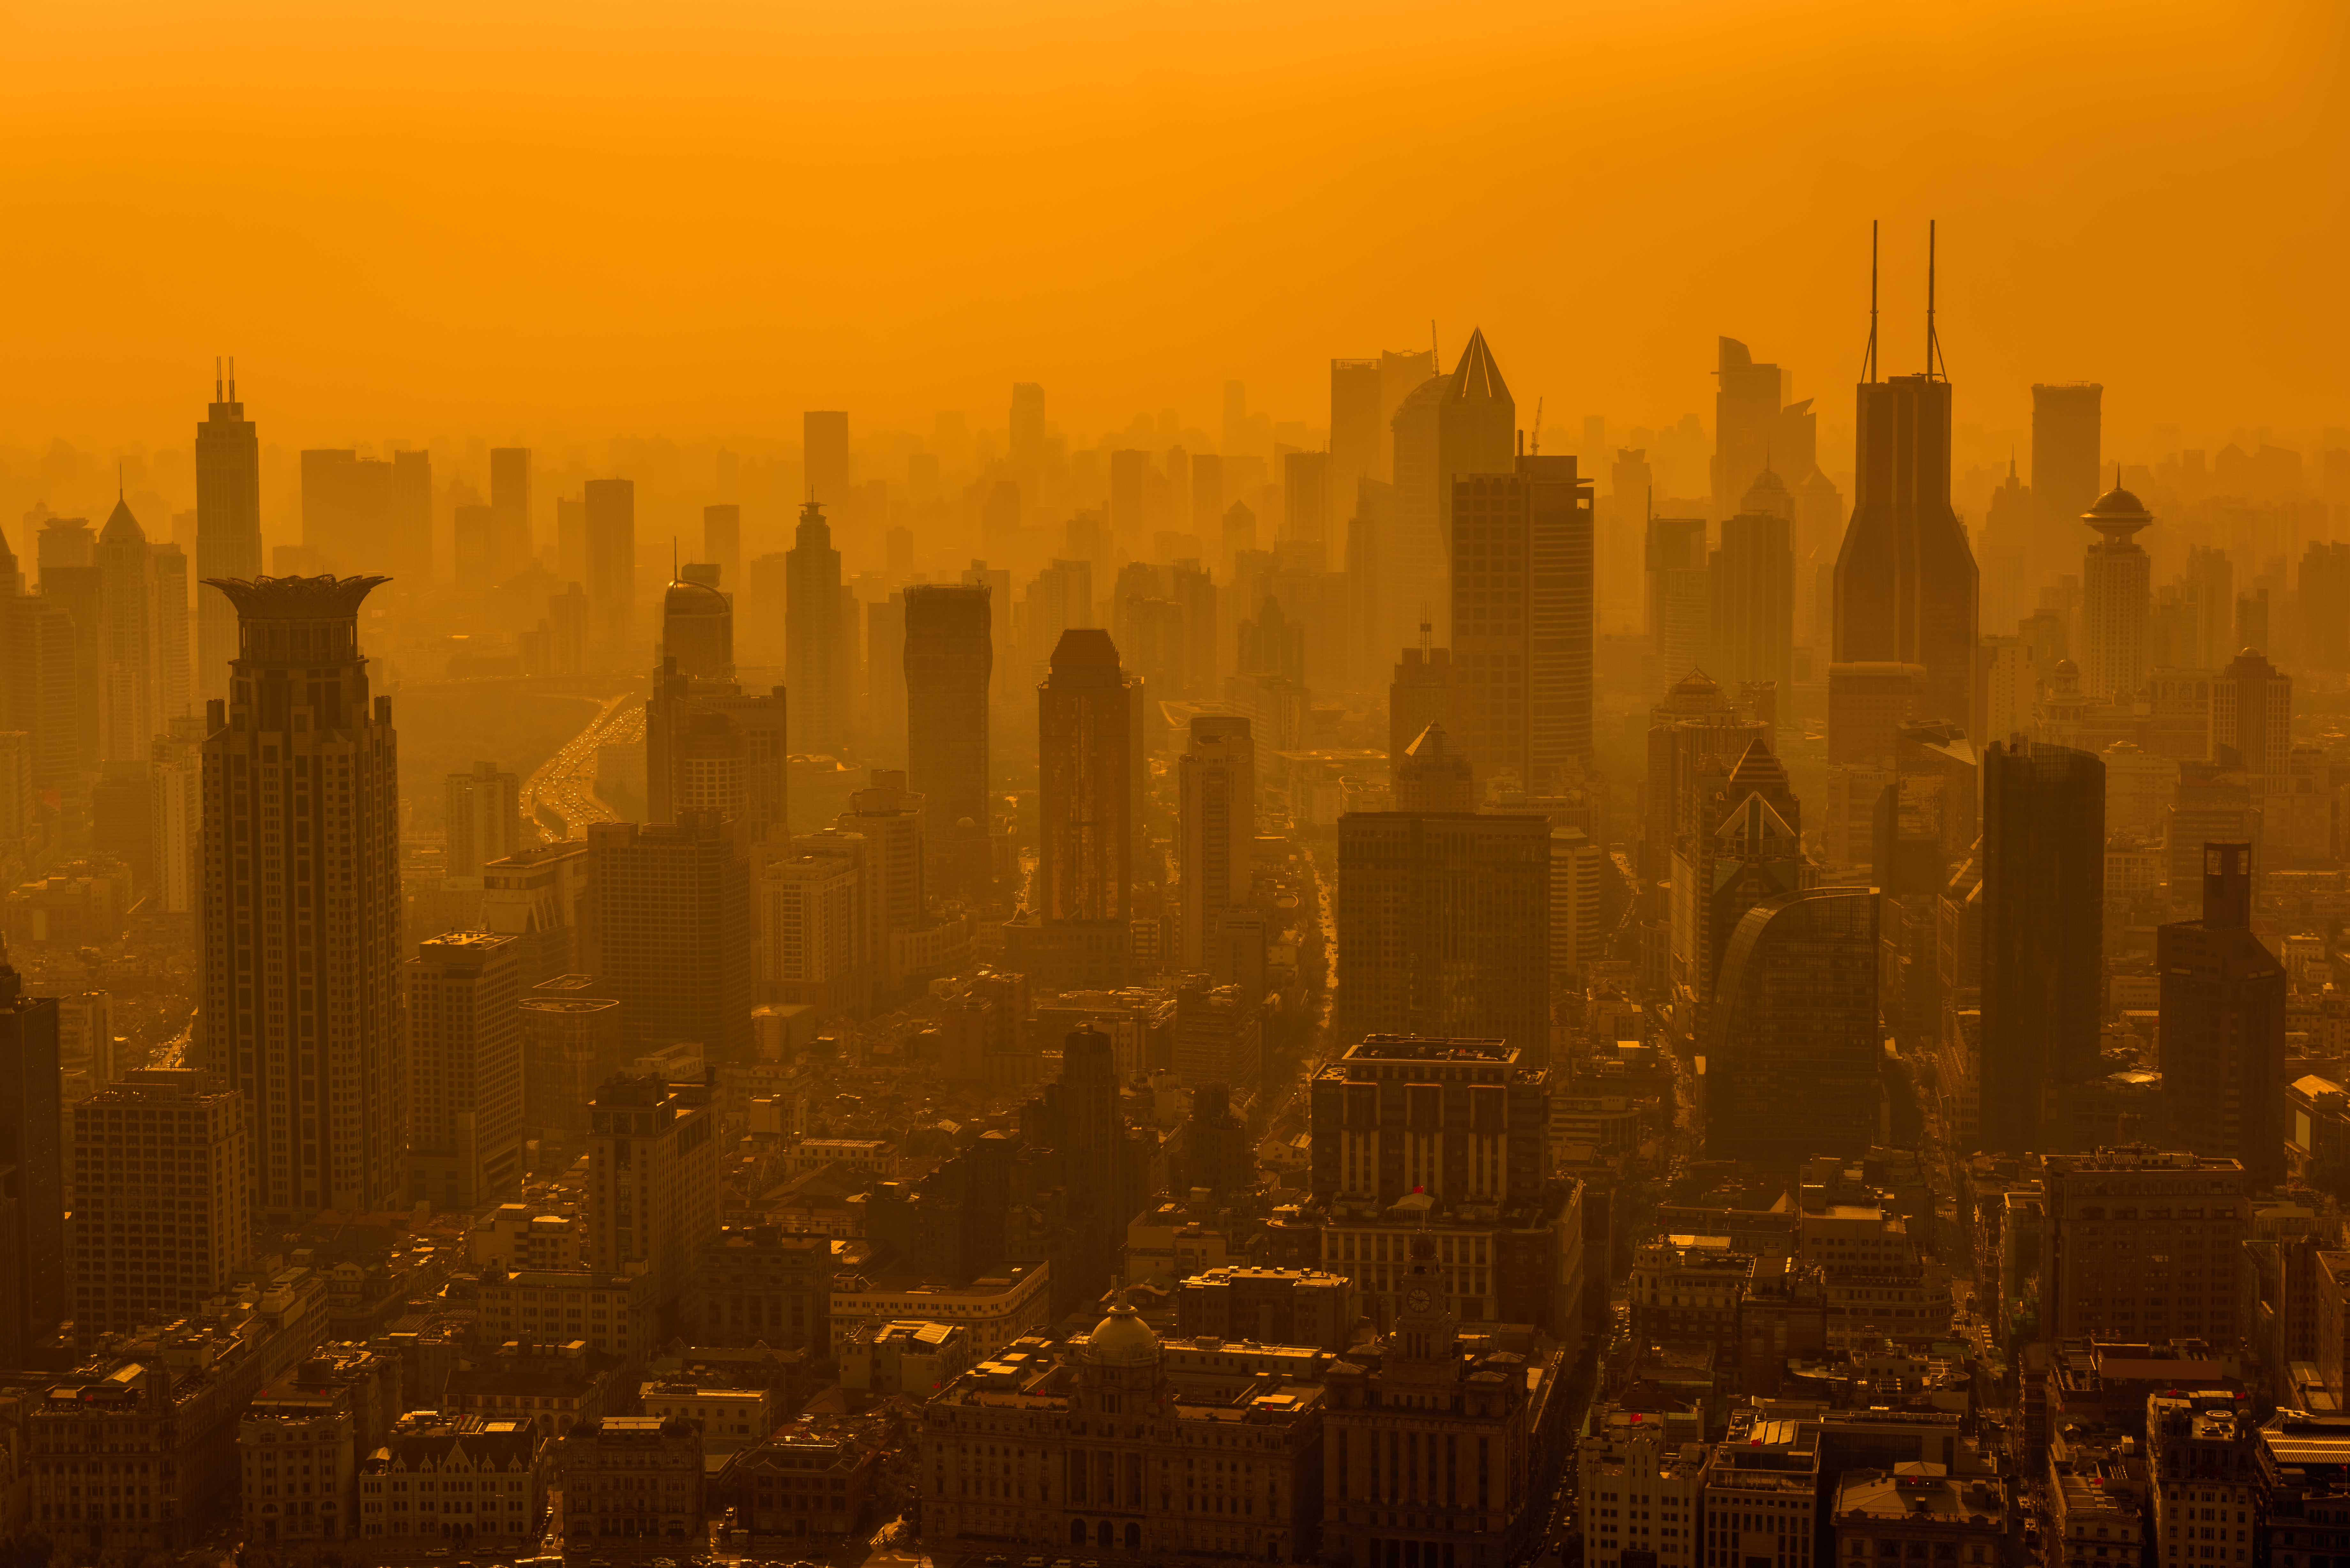 The skyline of a modern city seen through an orangish-brown sky, the result of high levels of air pollution.